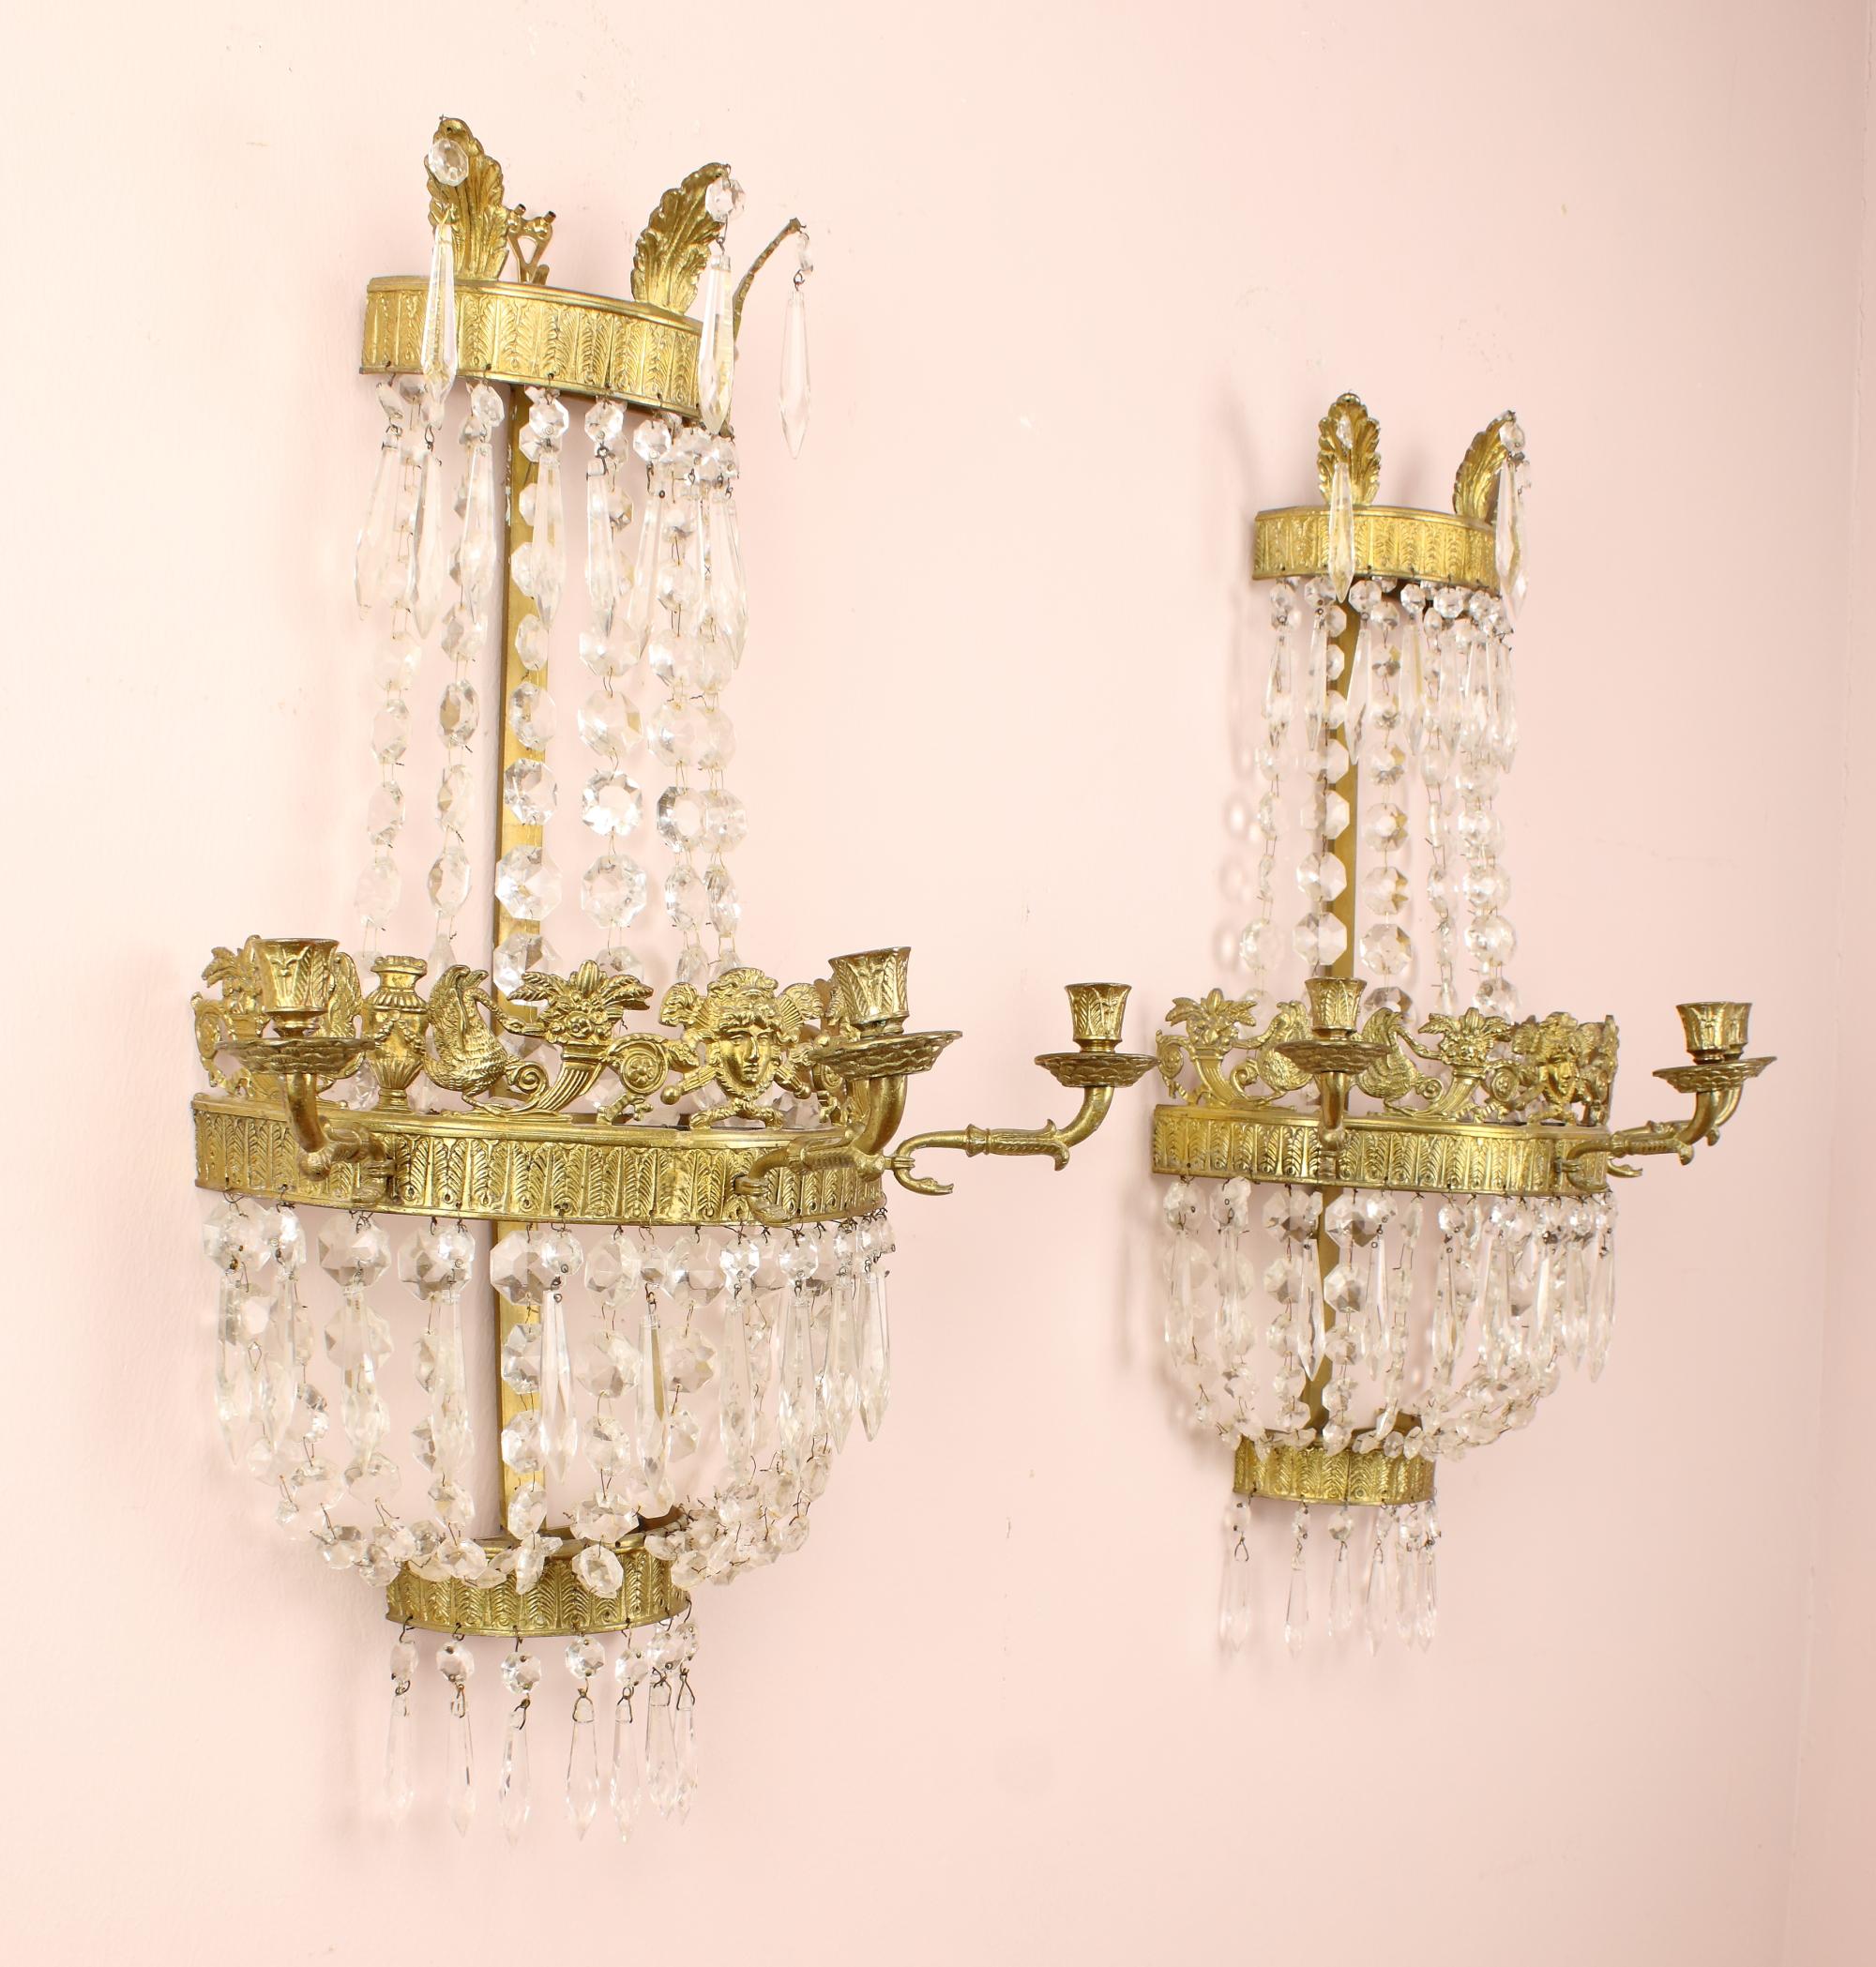 Pair of Early 19th century basket shape gilt bronze crystal empire wall lights.

Cross-shaped gilt-bronze backplate with three semicircular rings decorated with stylised feather friezes. The larger central ring, which is topped by an Apollons'